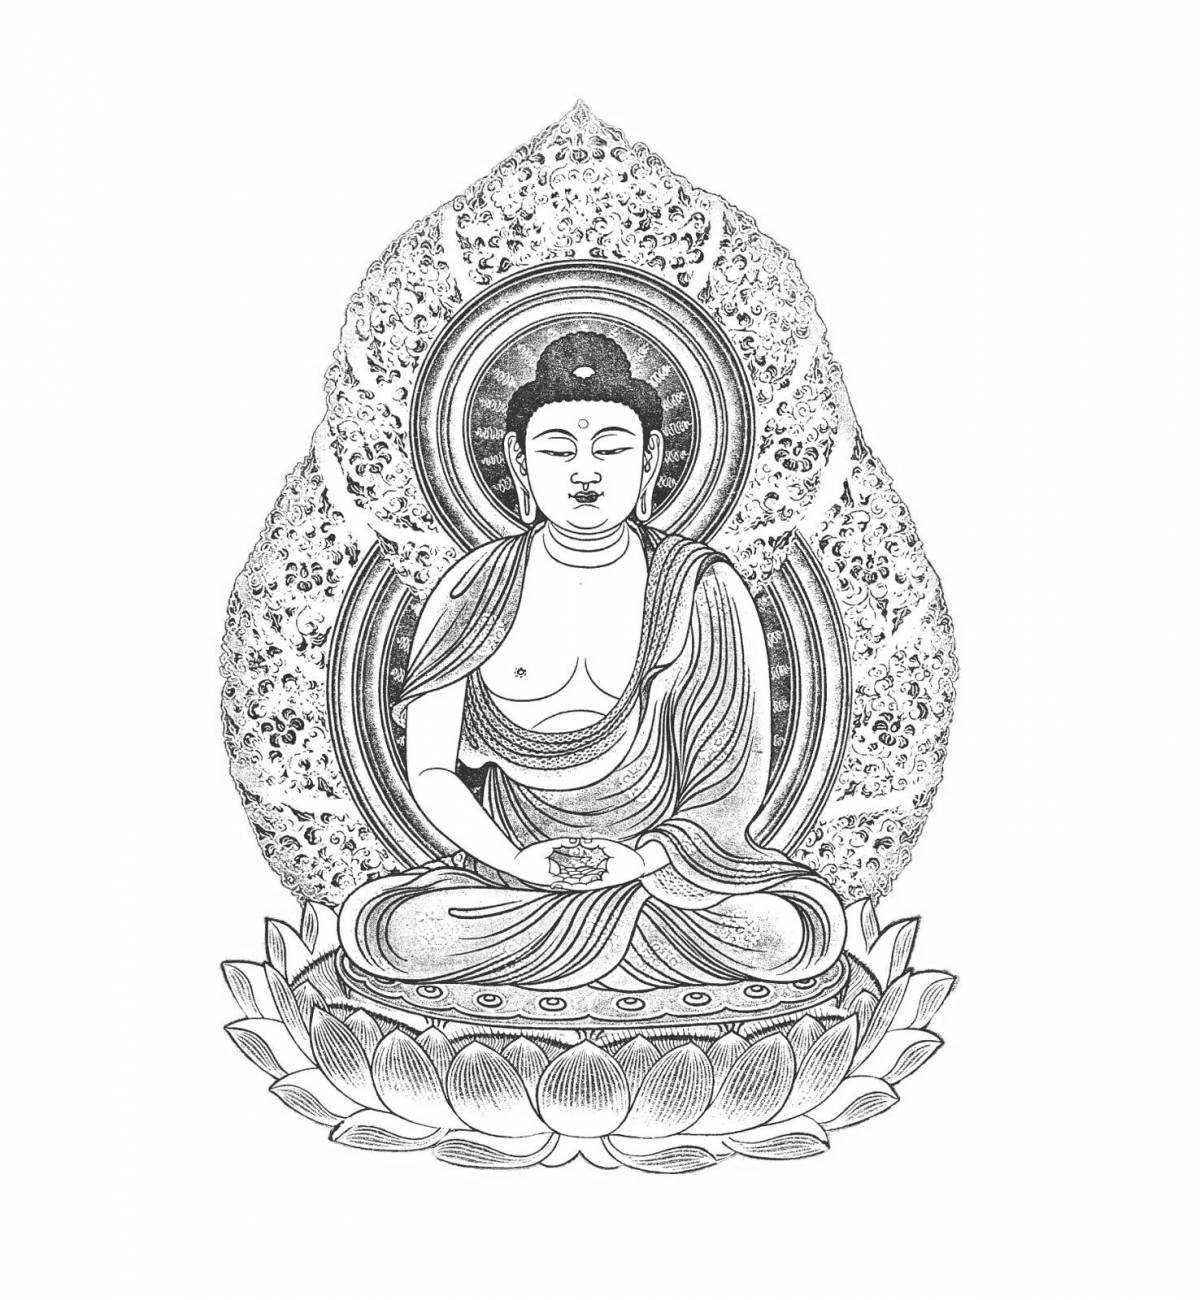 Charming buddhism coloring page